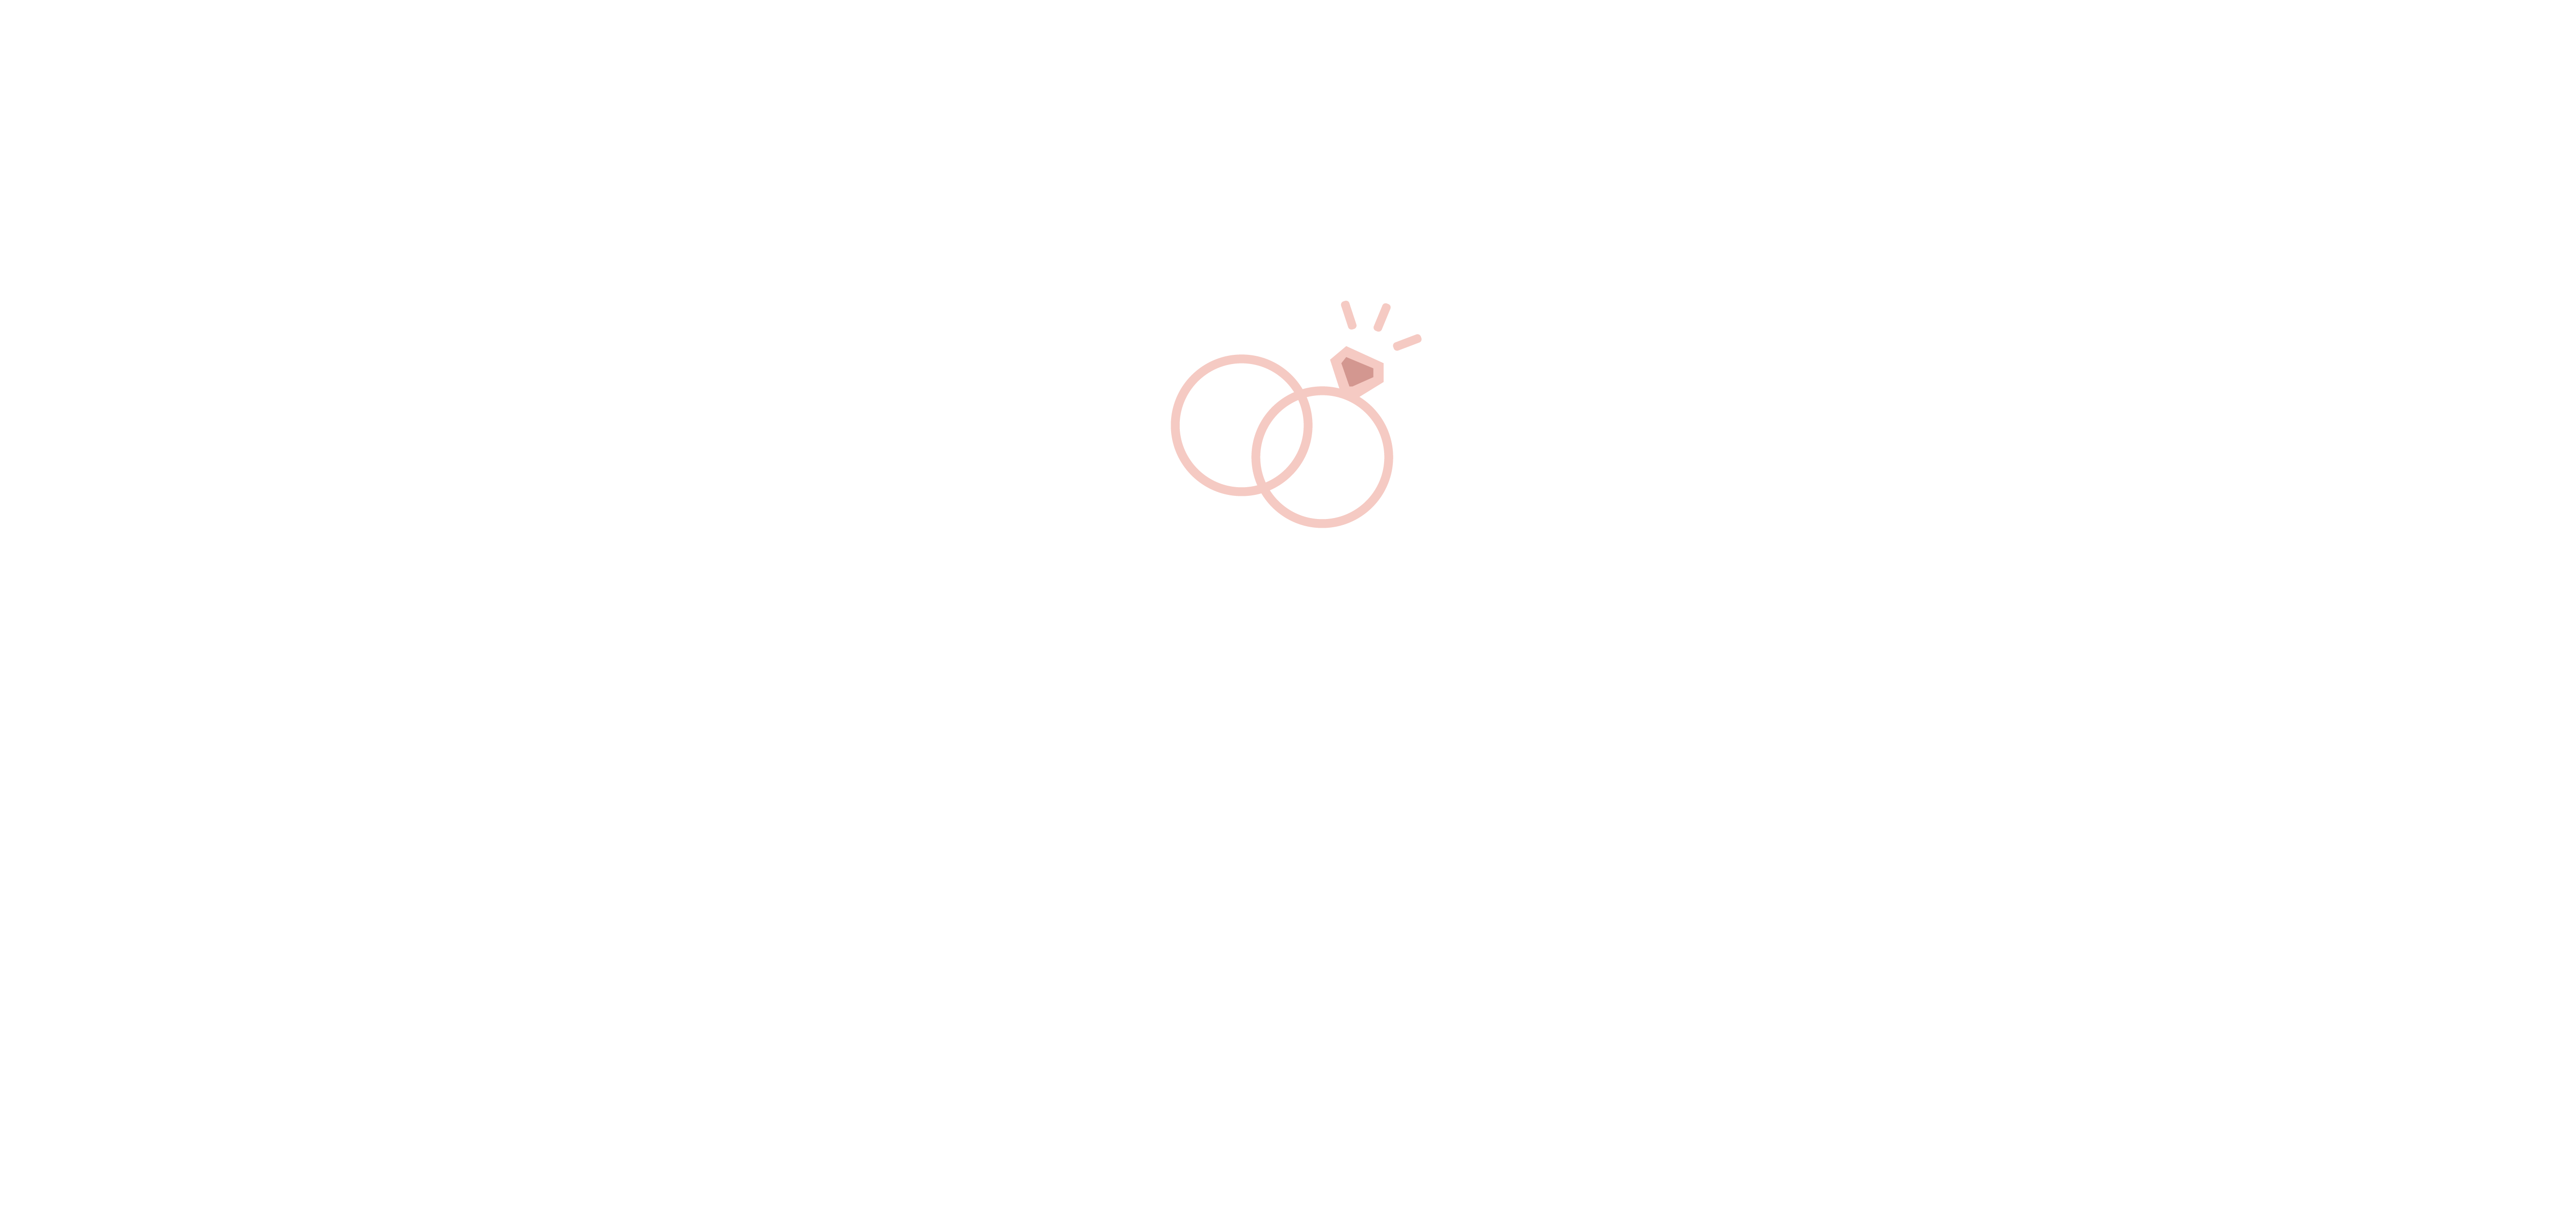 Halal Match logo in white with peach rings icon.